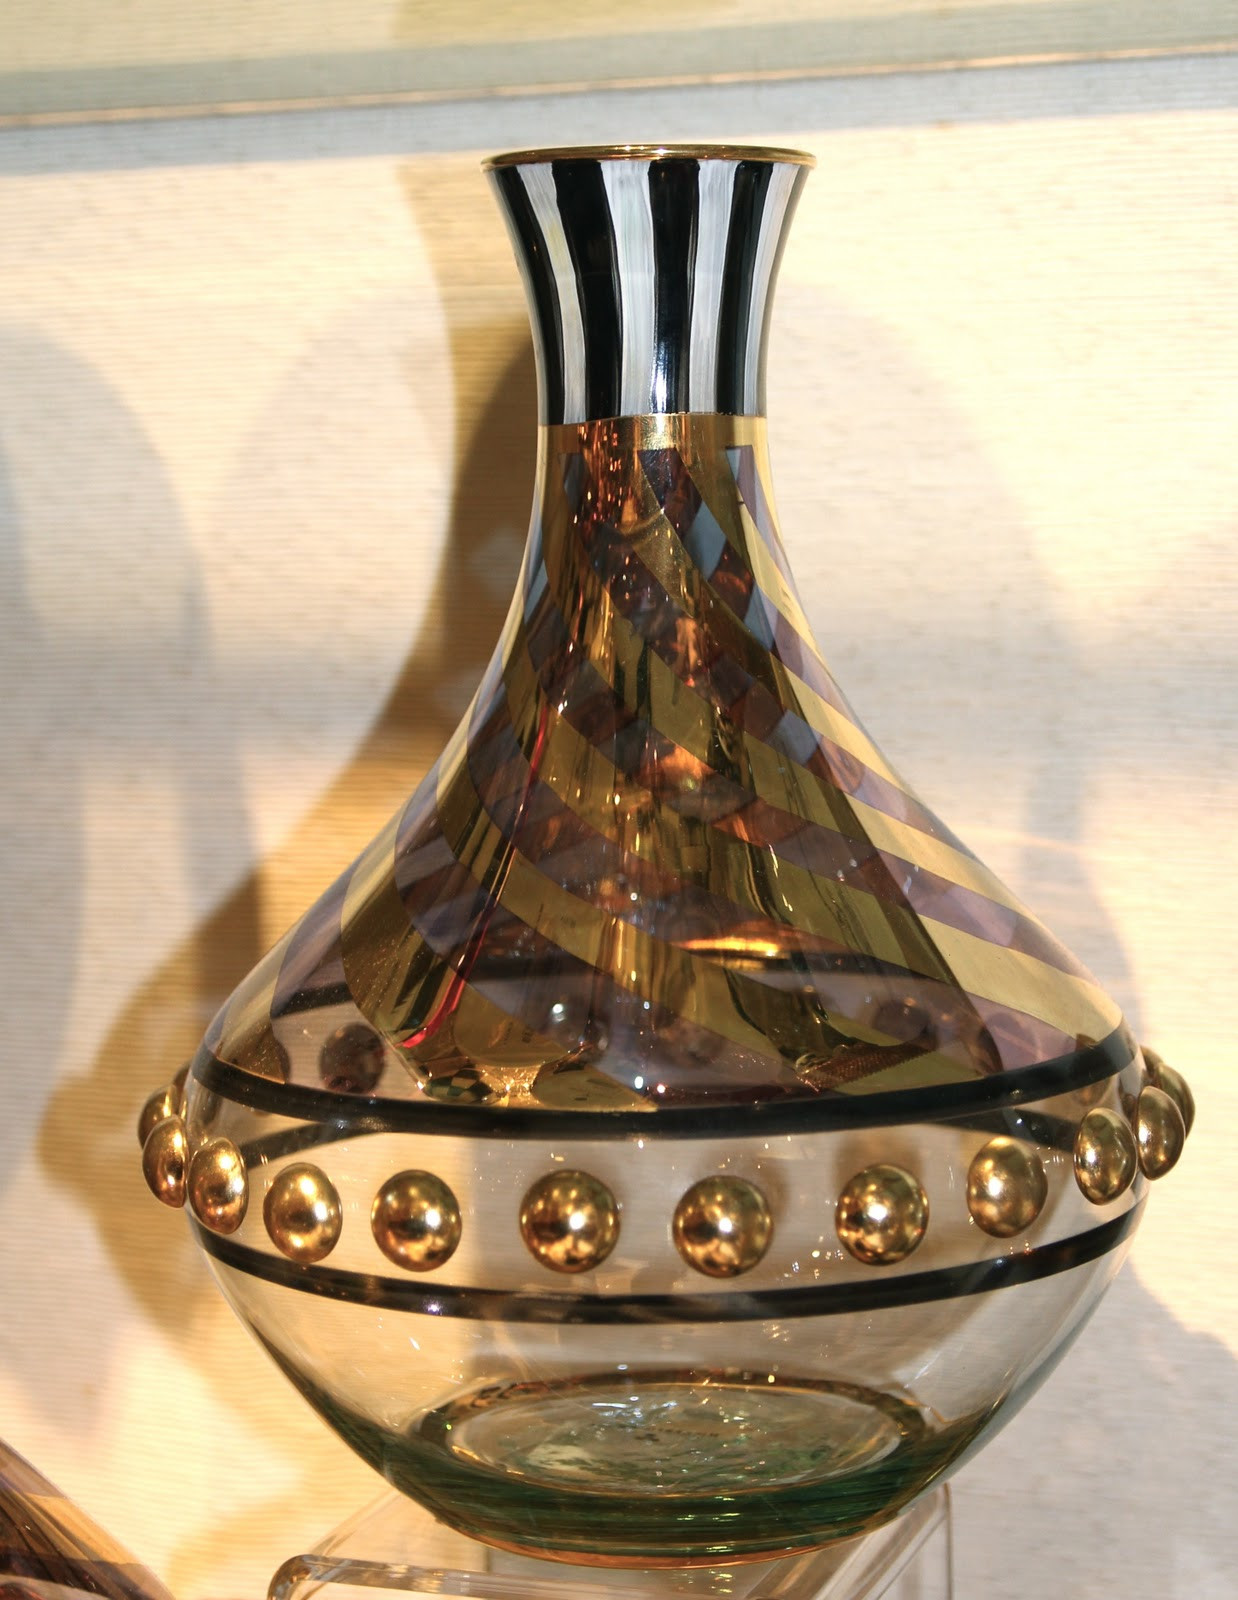 mackenzie childs vase sale of holiday shopping mackenzie childs with glass decanter 100 blown glass hand painted